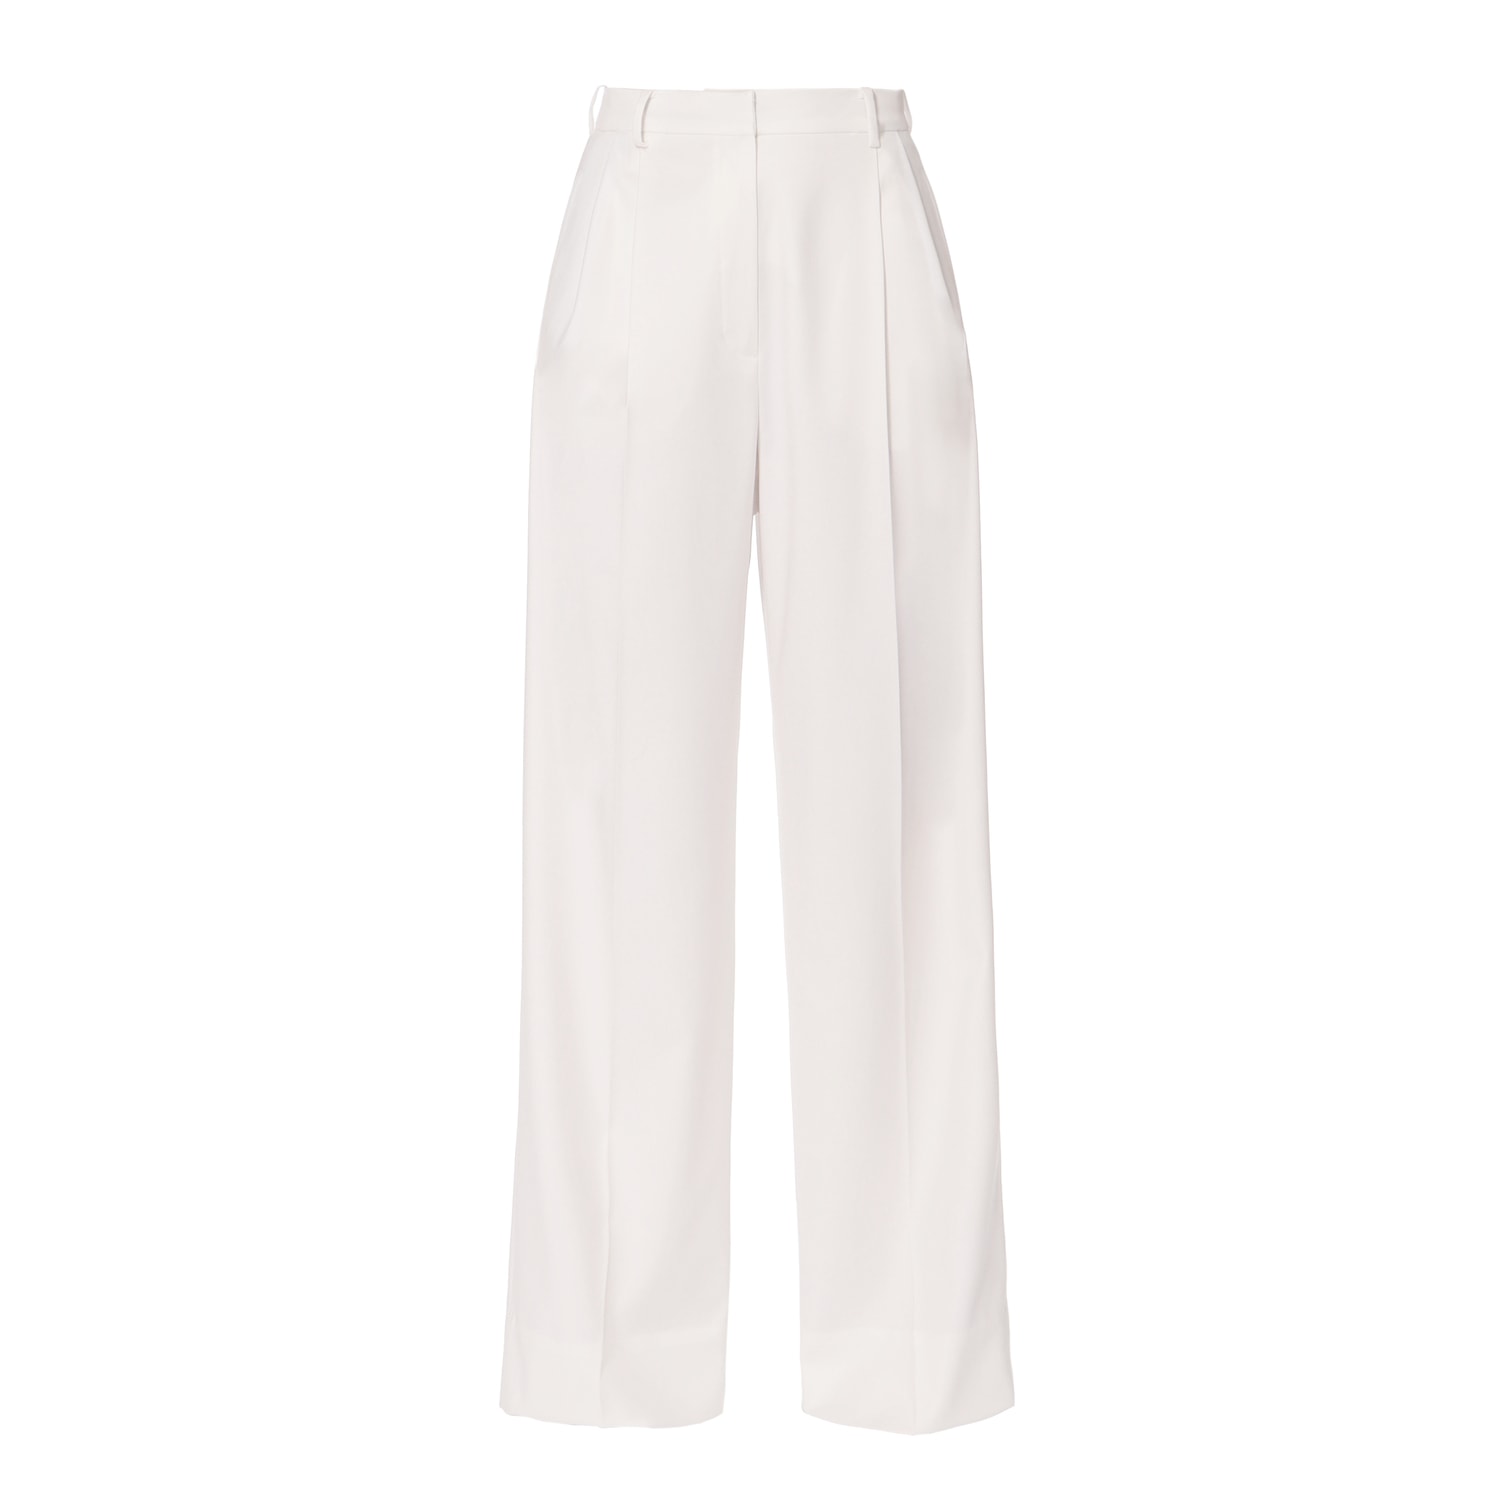 Shop Aggi Women's Gwen Aesthetic White High Waisted Wide Trousers